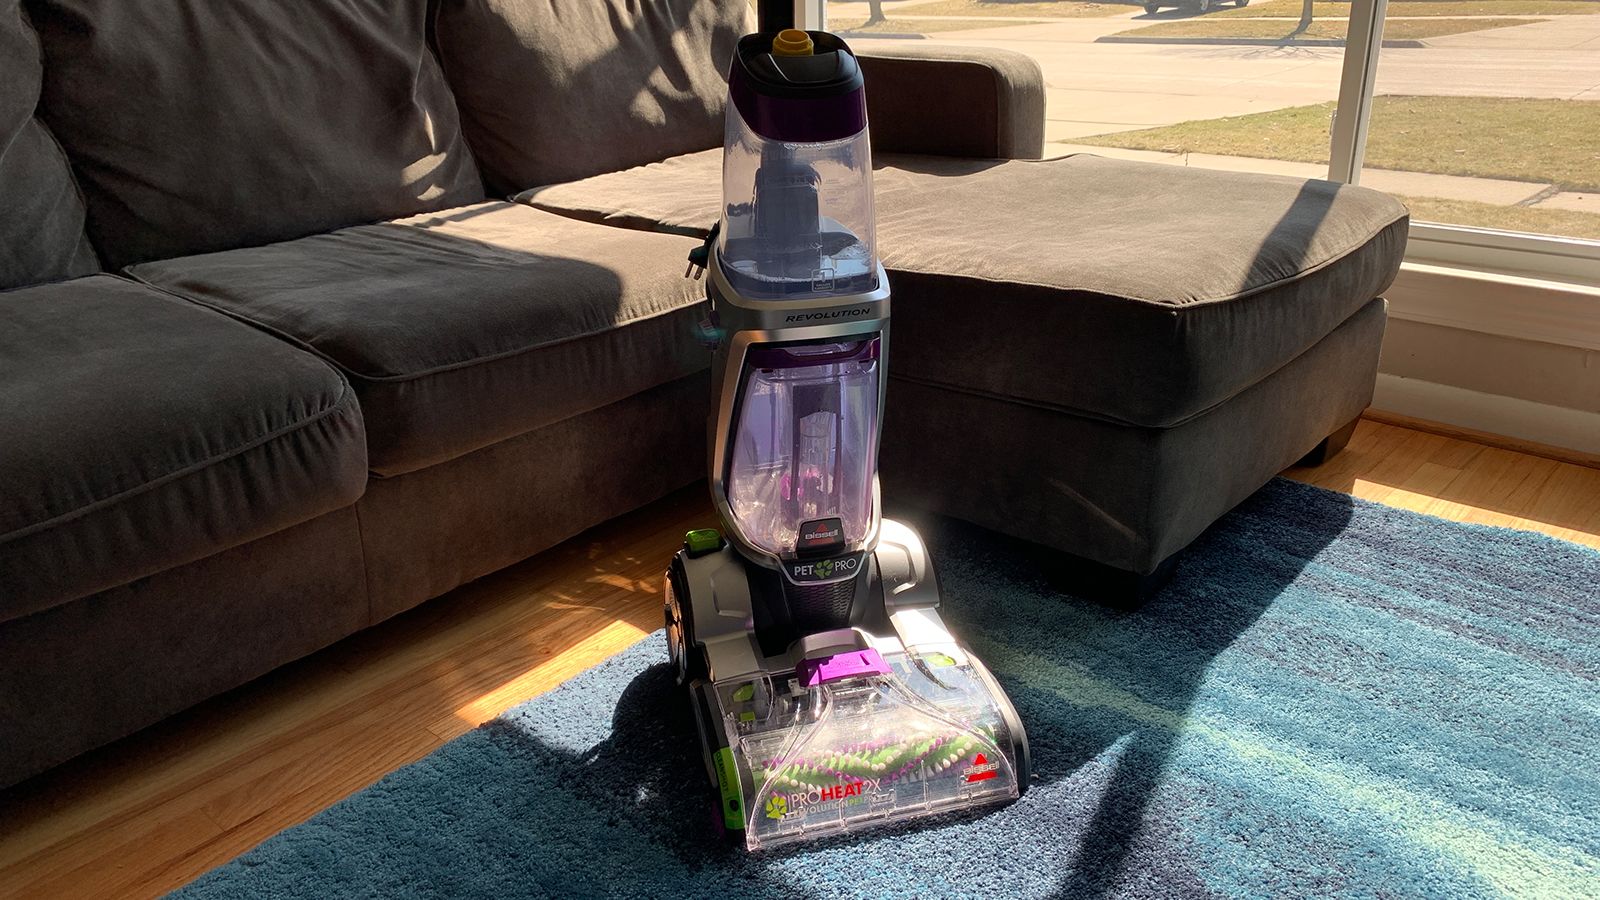 CleanSlate Pro Portable Carpet and Upholstery Spot Cleaner